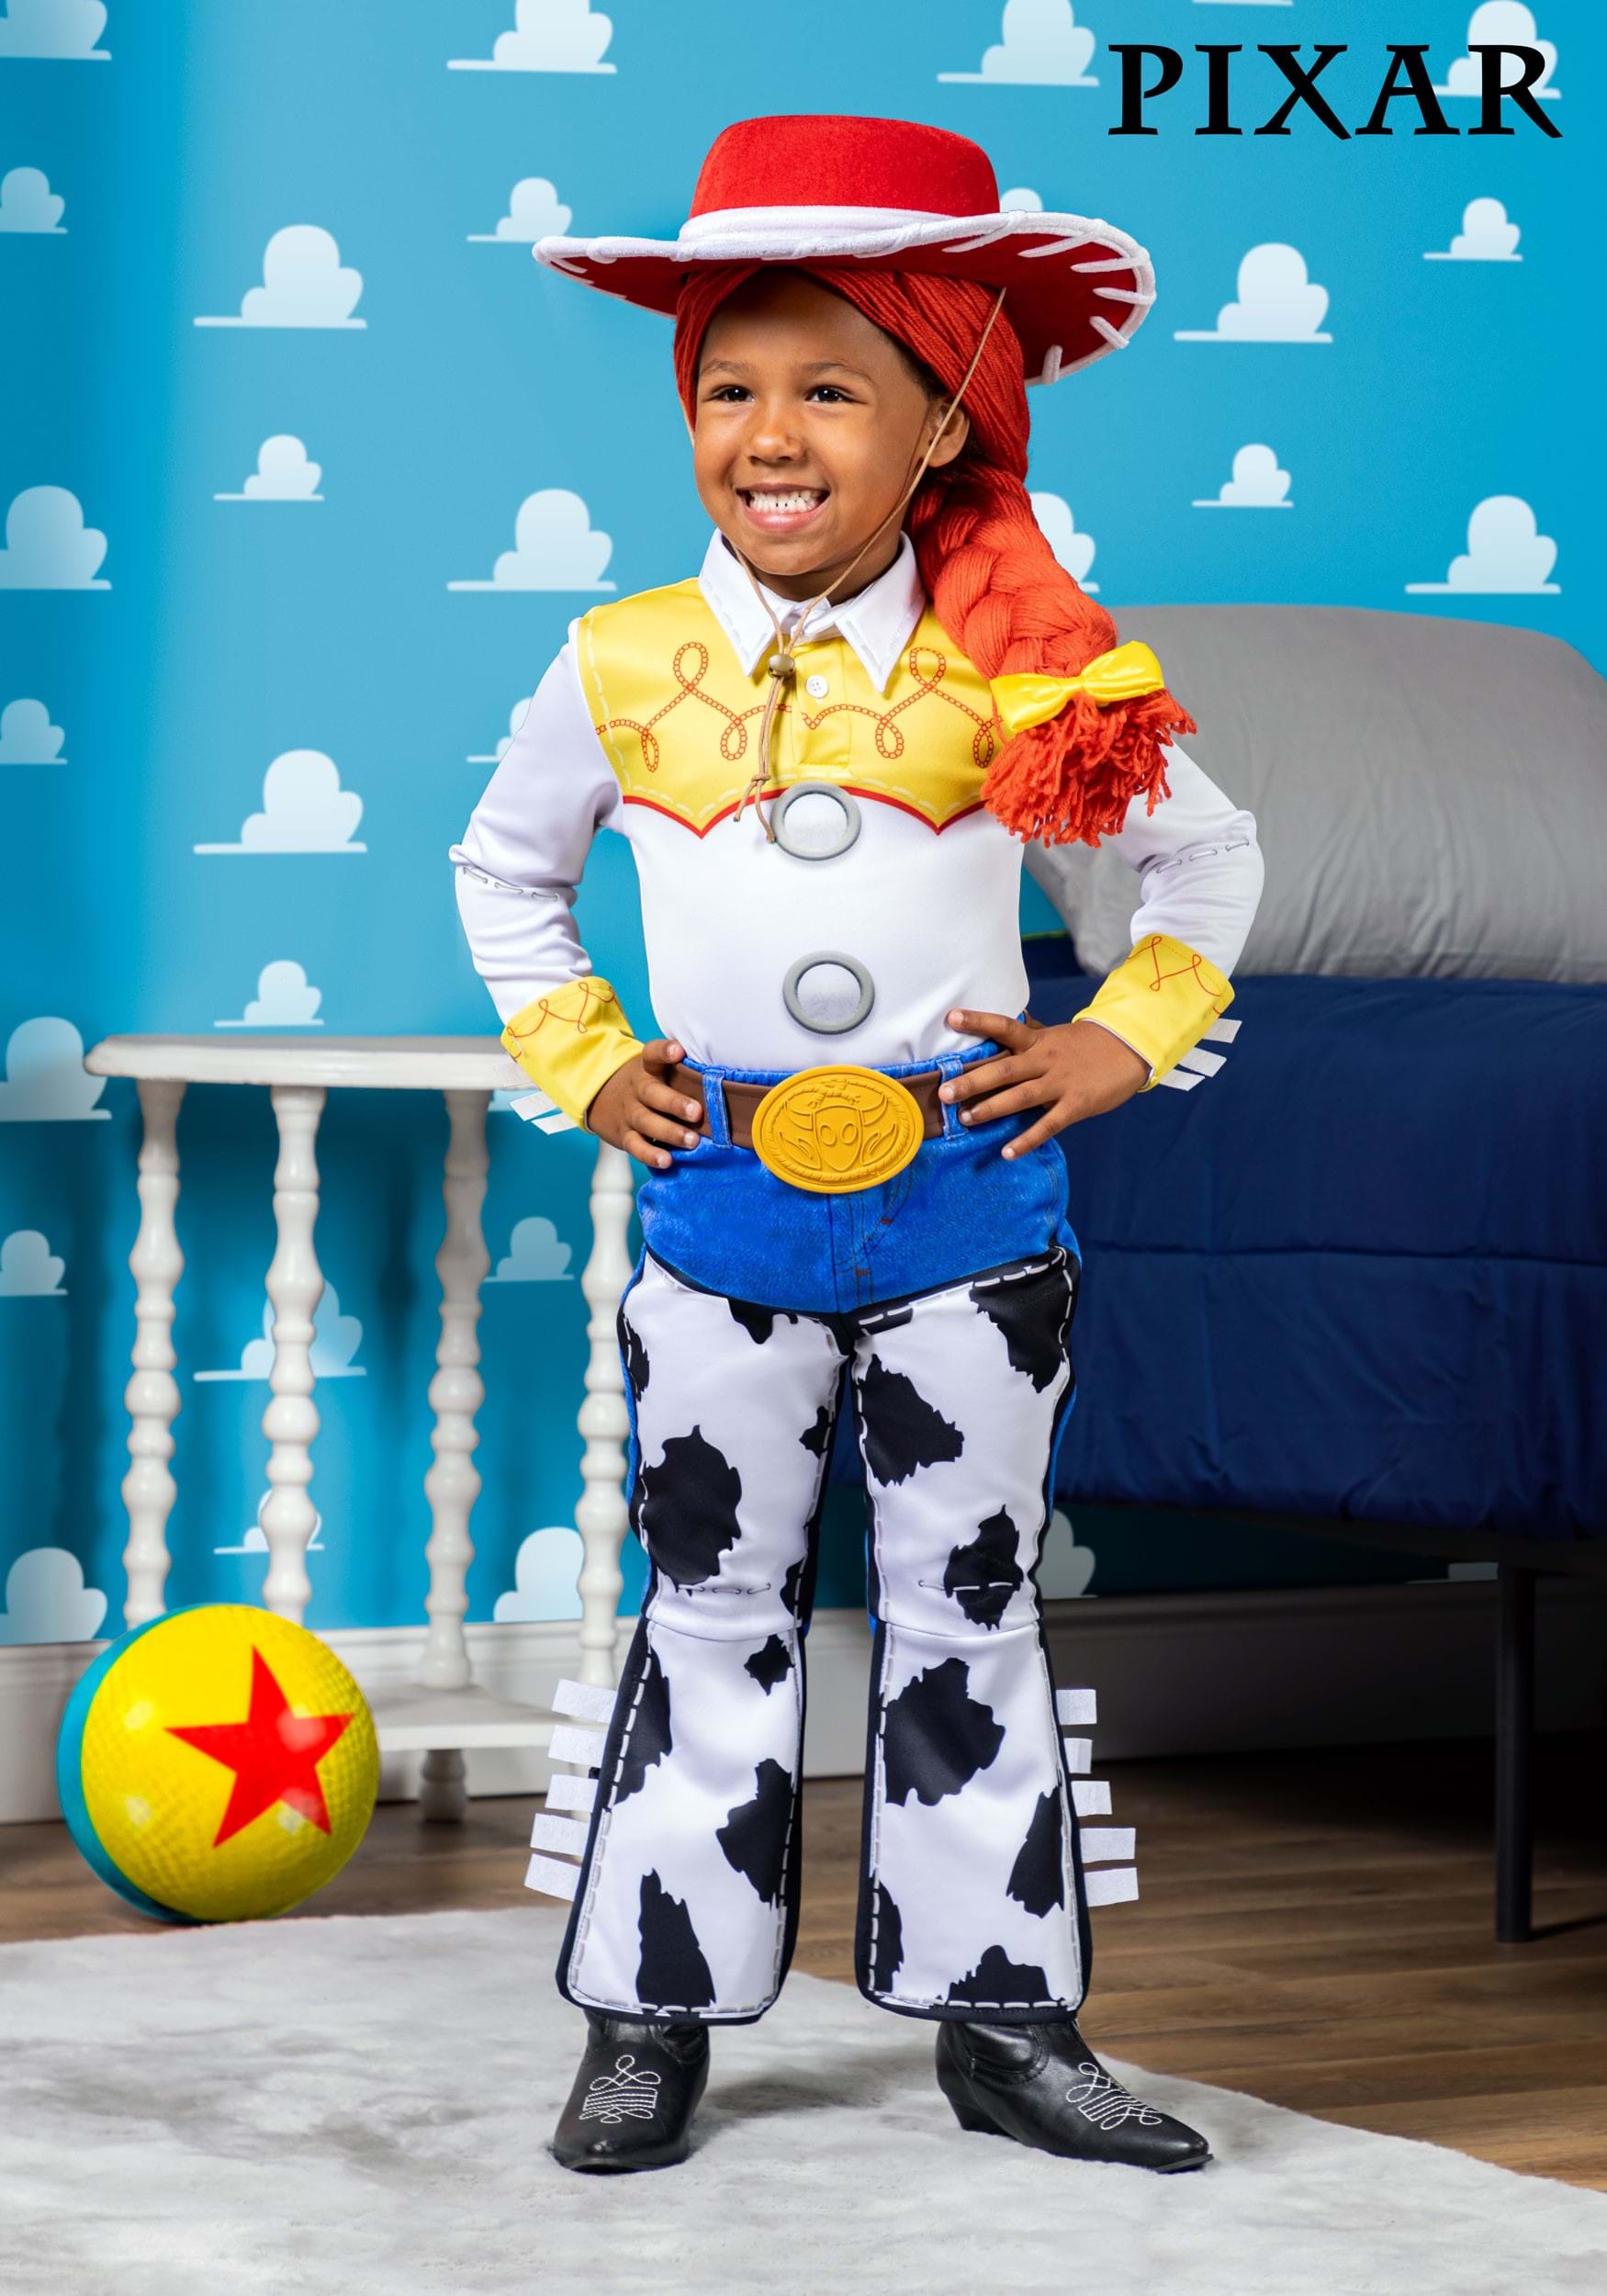 The characters from Toy Story!  Toy story costumes, Themed halloween  costumes, Toy story halloween costume